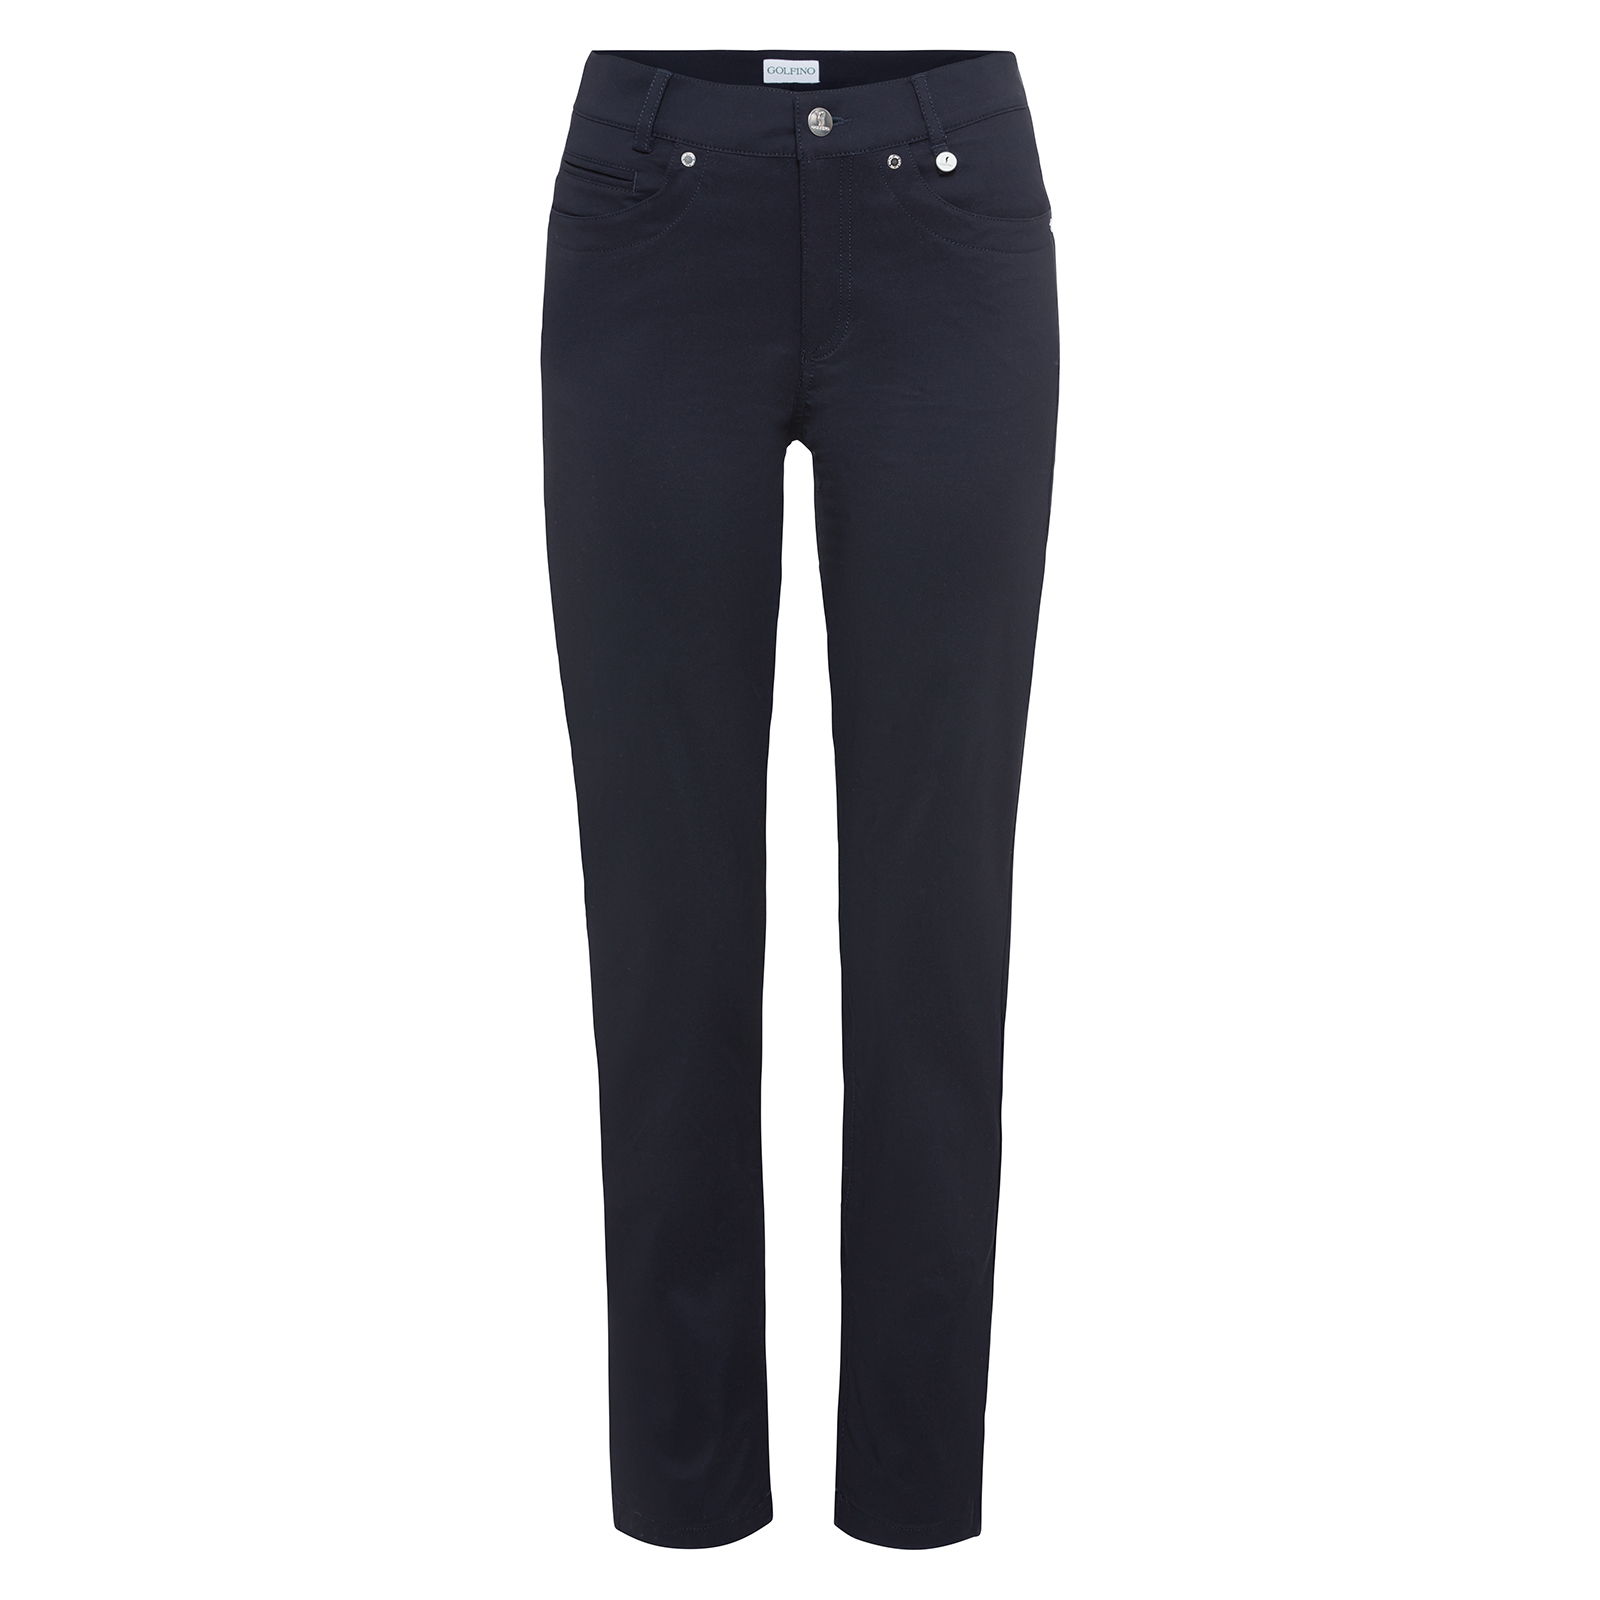 Ladies' 7/8 trousers in casual 5-pocket style 